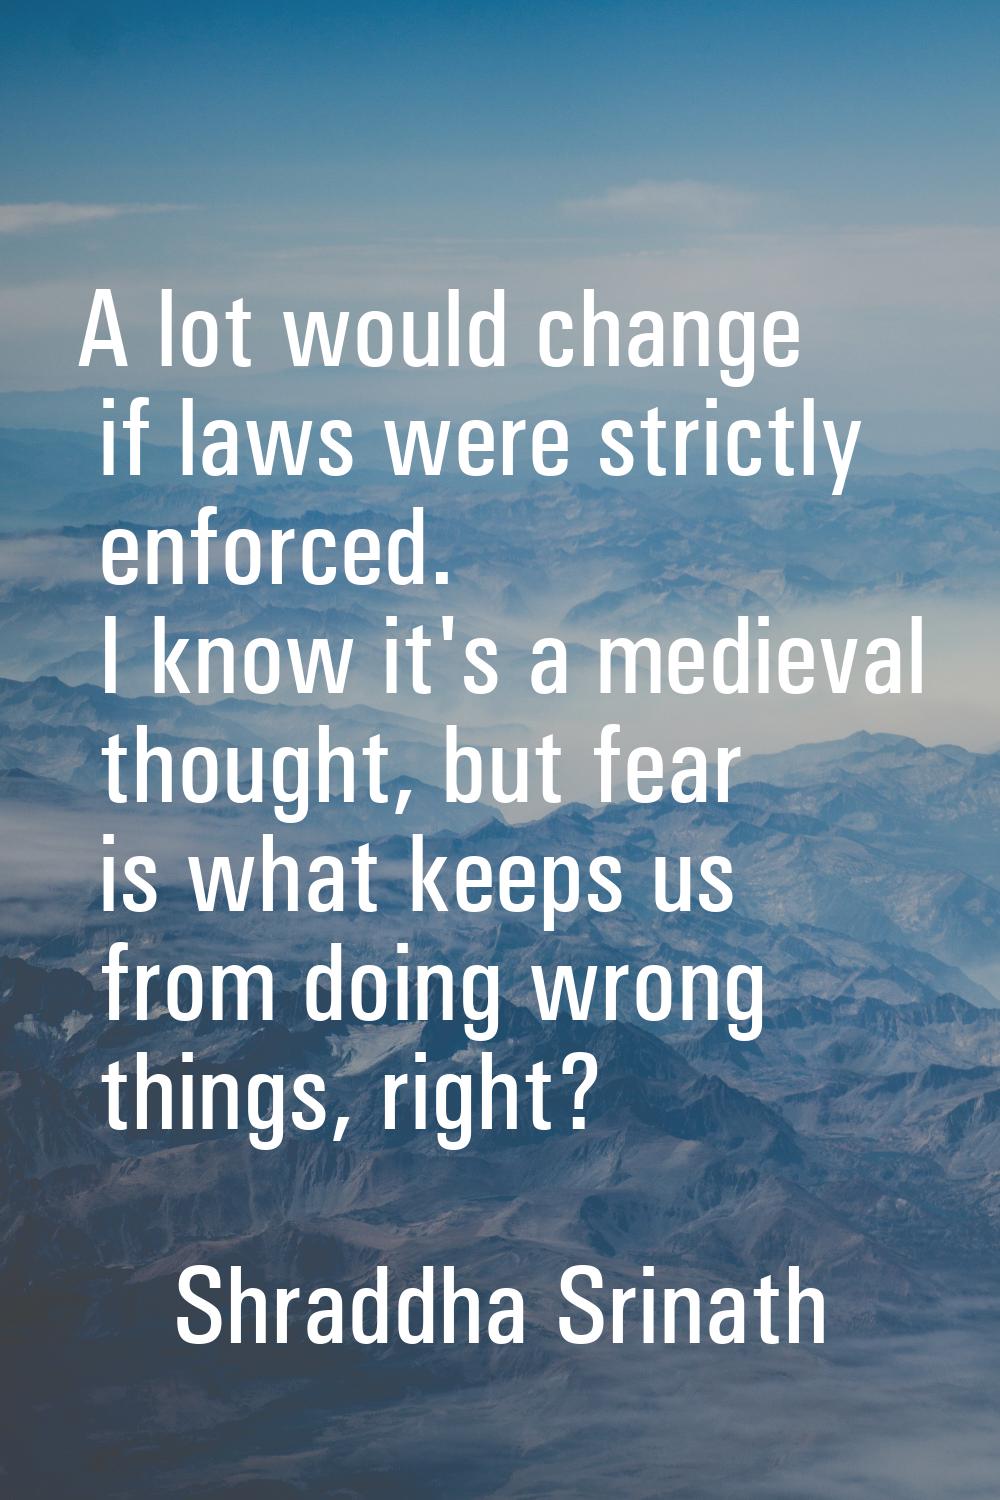 A lot would change if laws were strictly enforced. I know it's a medieval thought, but fear is what